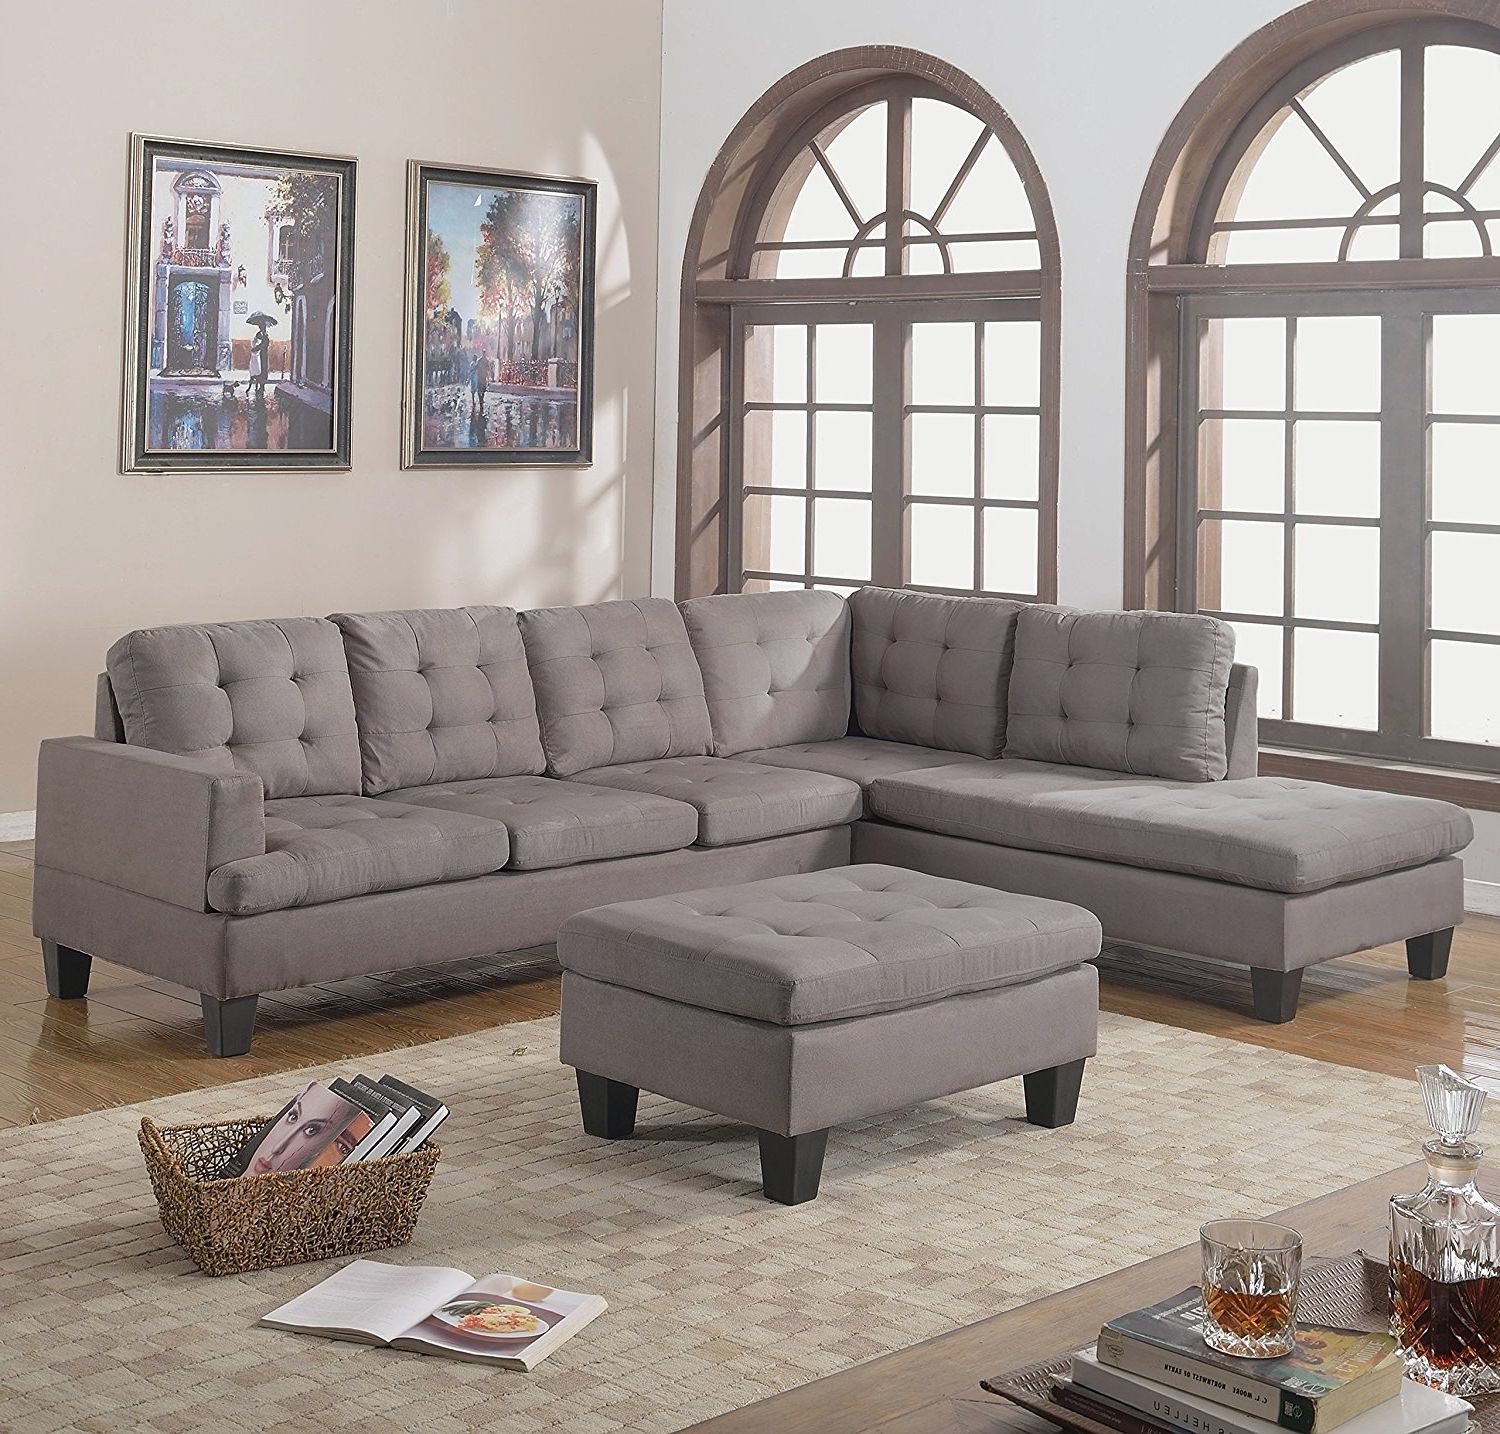 Furniture : American Furniture Warehouse 470 Living Room Furniture Regarding Recent St Cloud Mn Sectional Sofas (View 8 of 15)